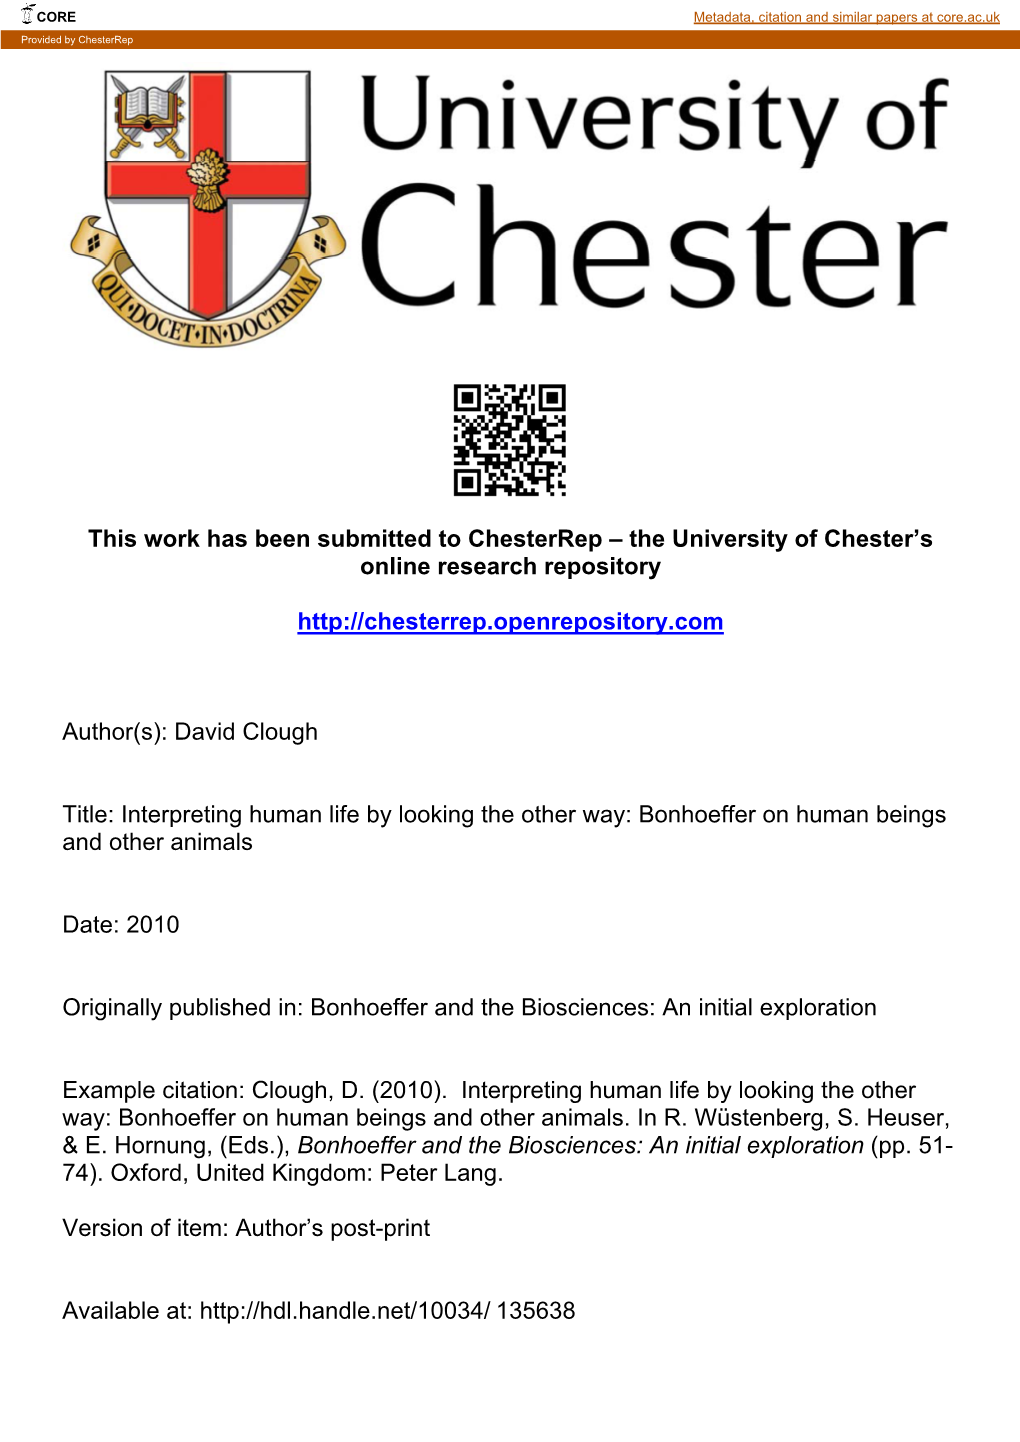 This Work Has Been Submitted to Chesterrep – the University of Chester’S Online Research Repository